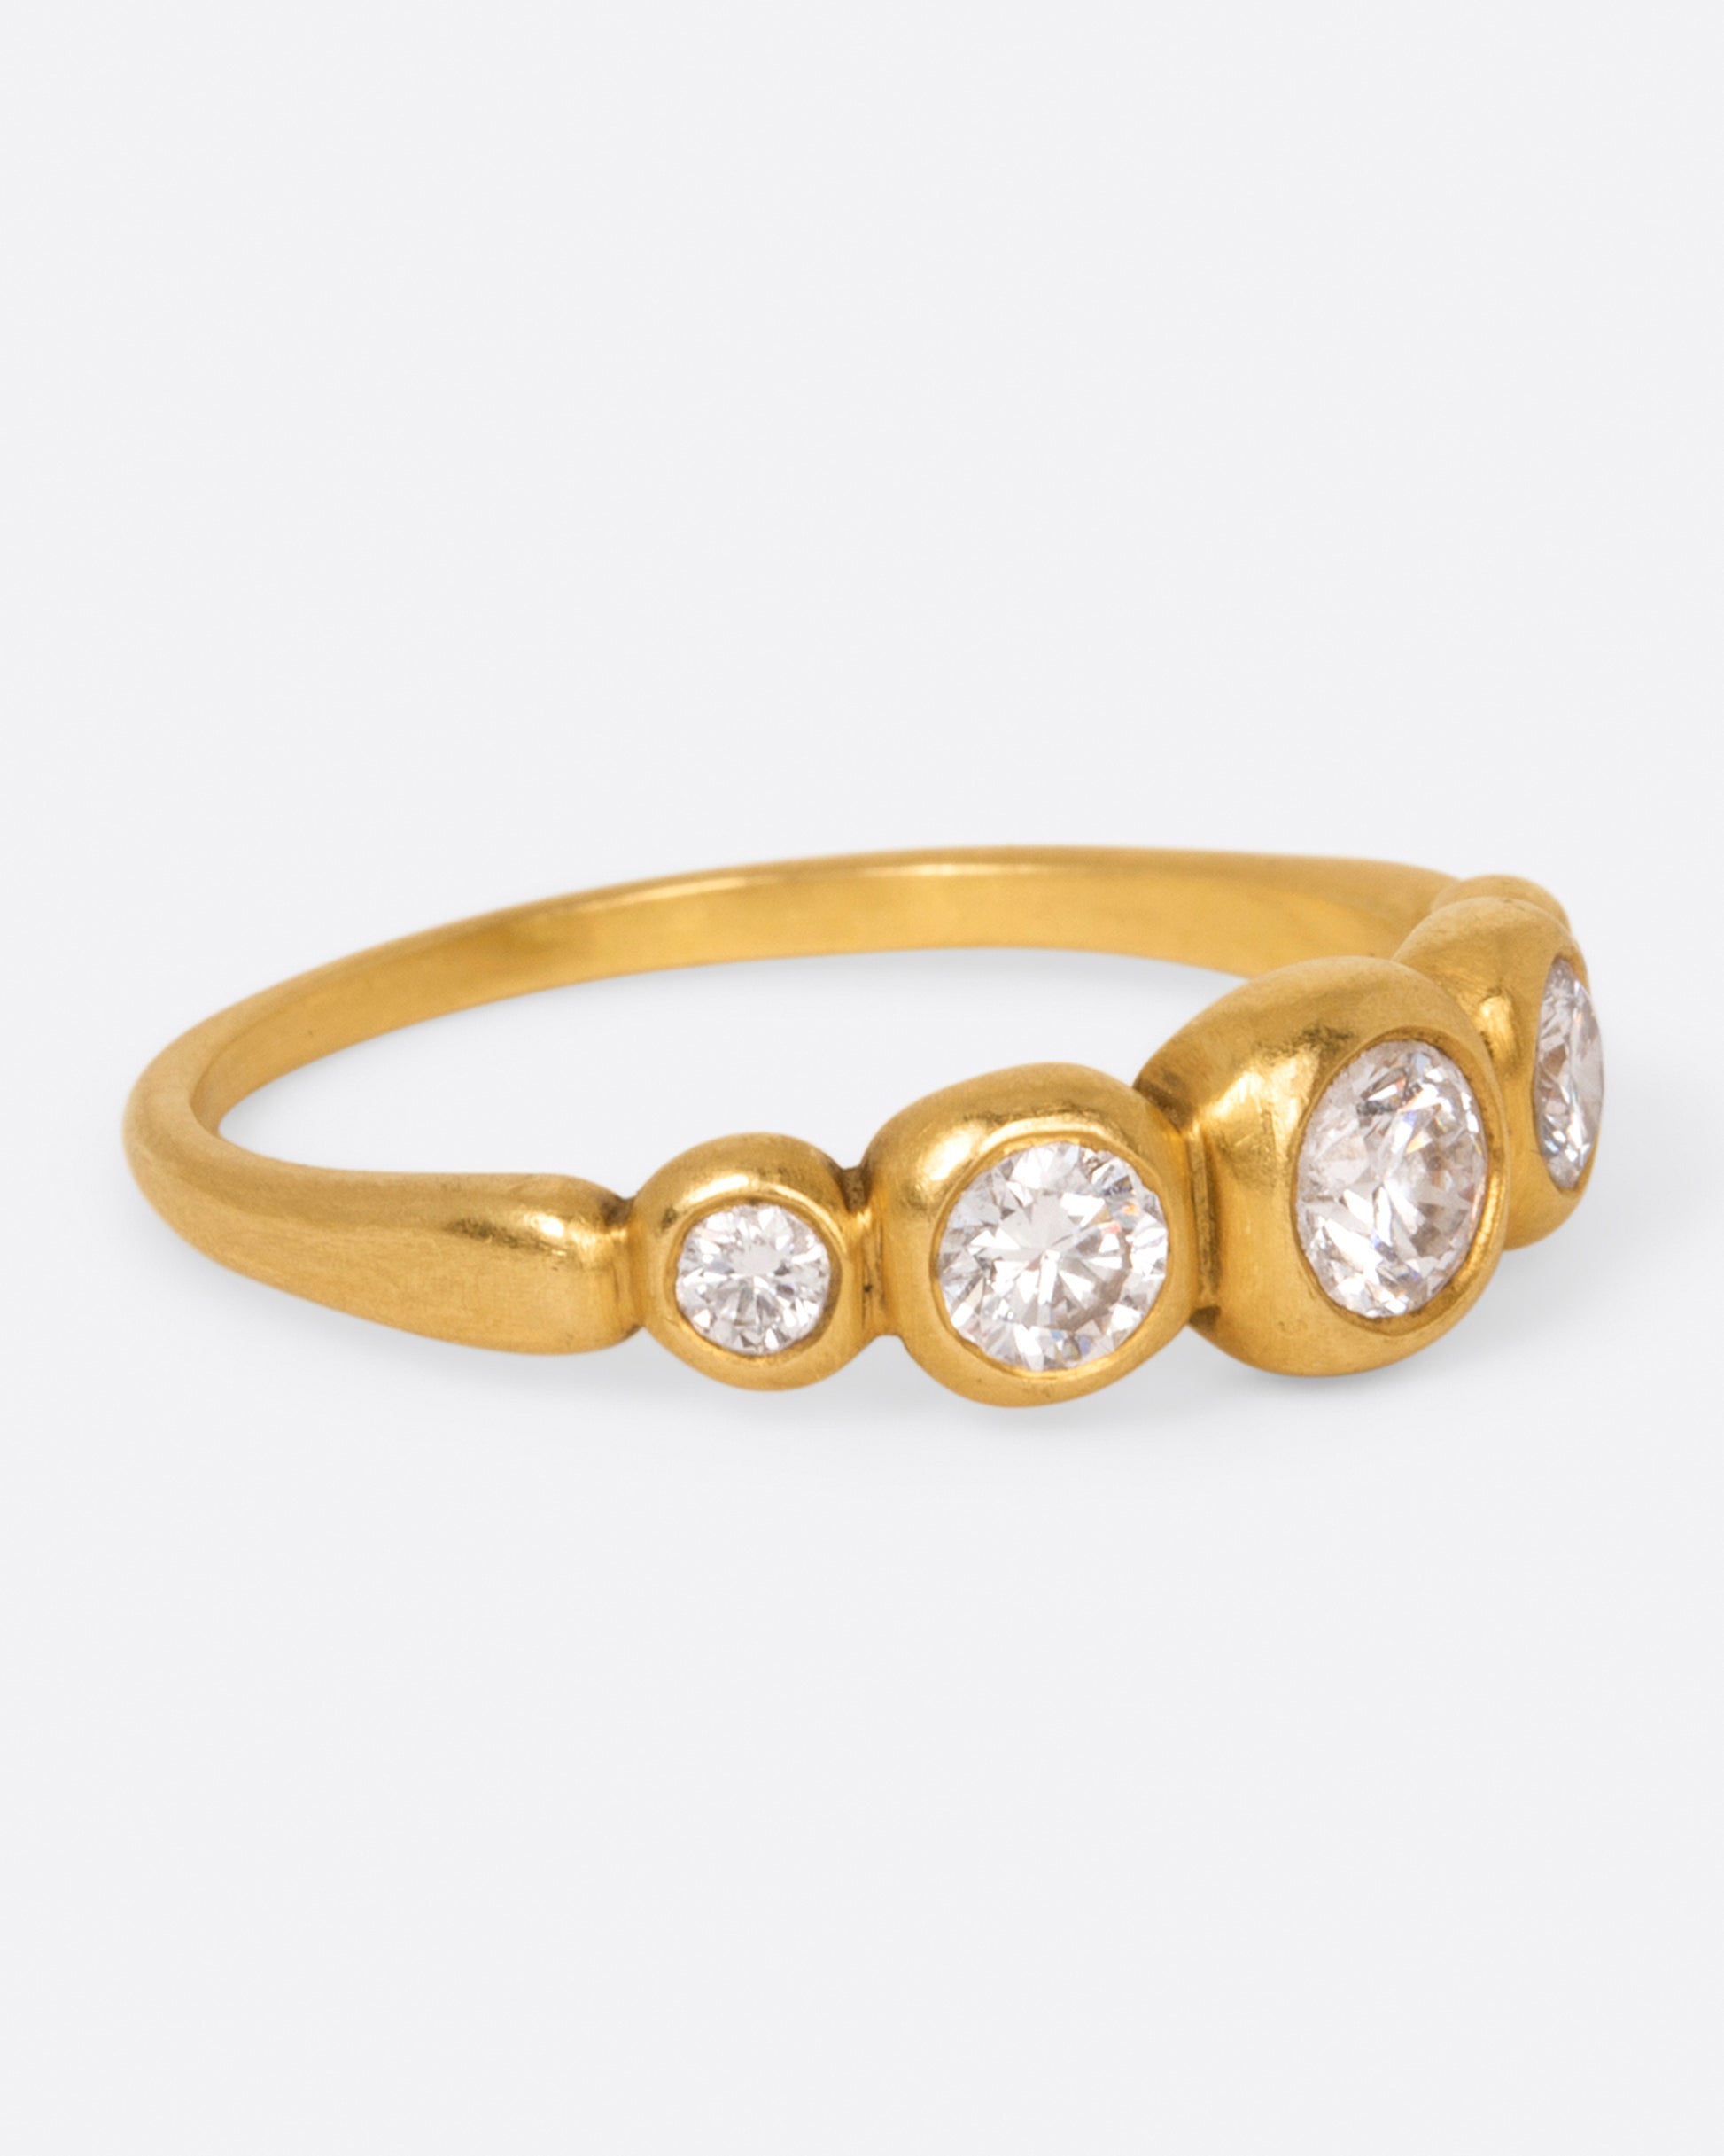 A brushed gold ring with five round white diamonds in graduated sizes, shown from the side.